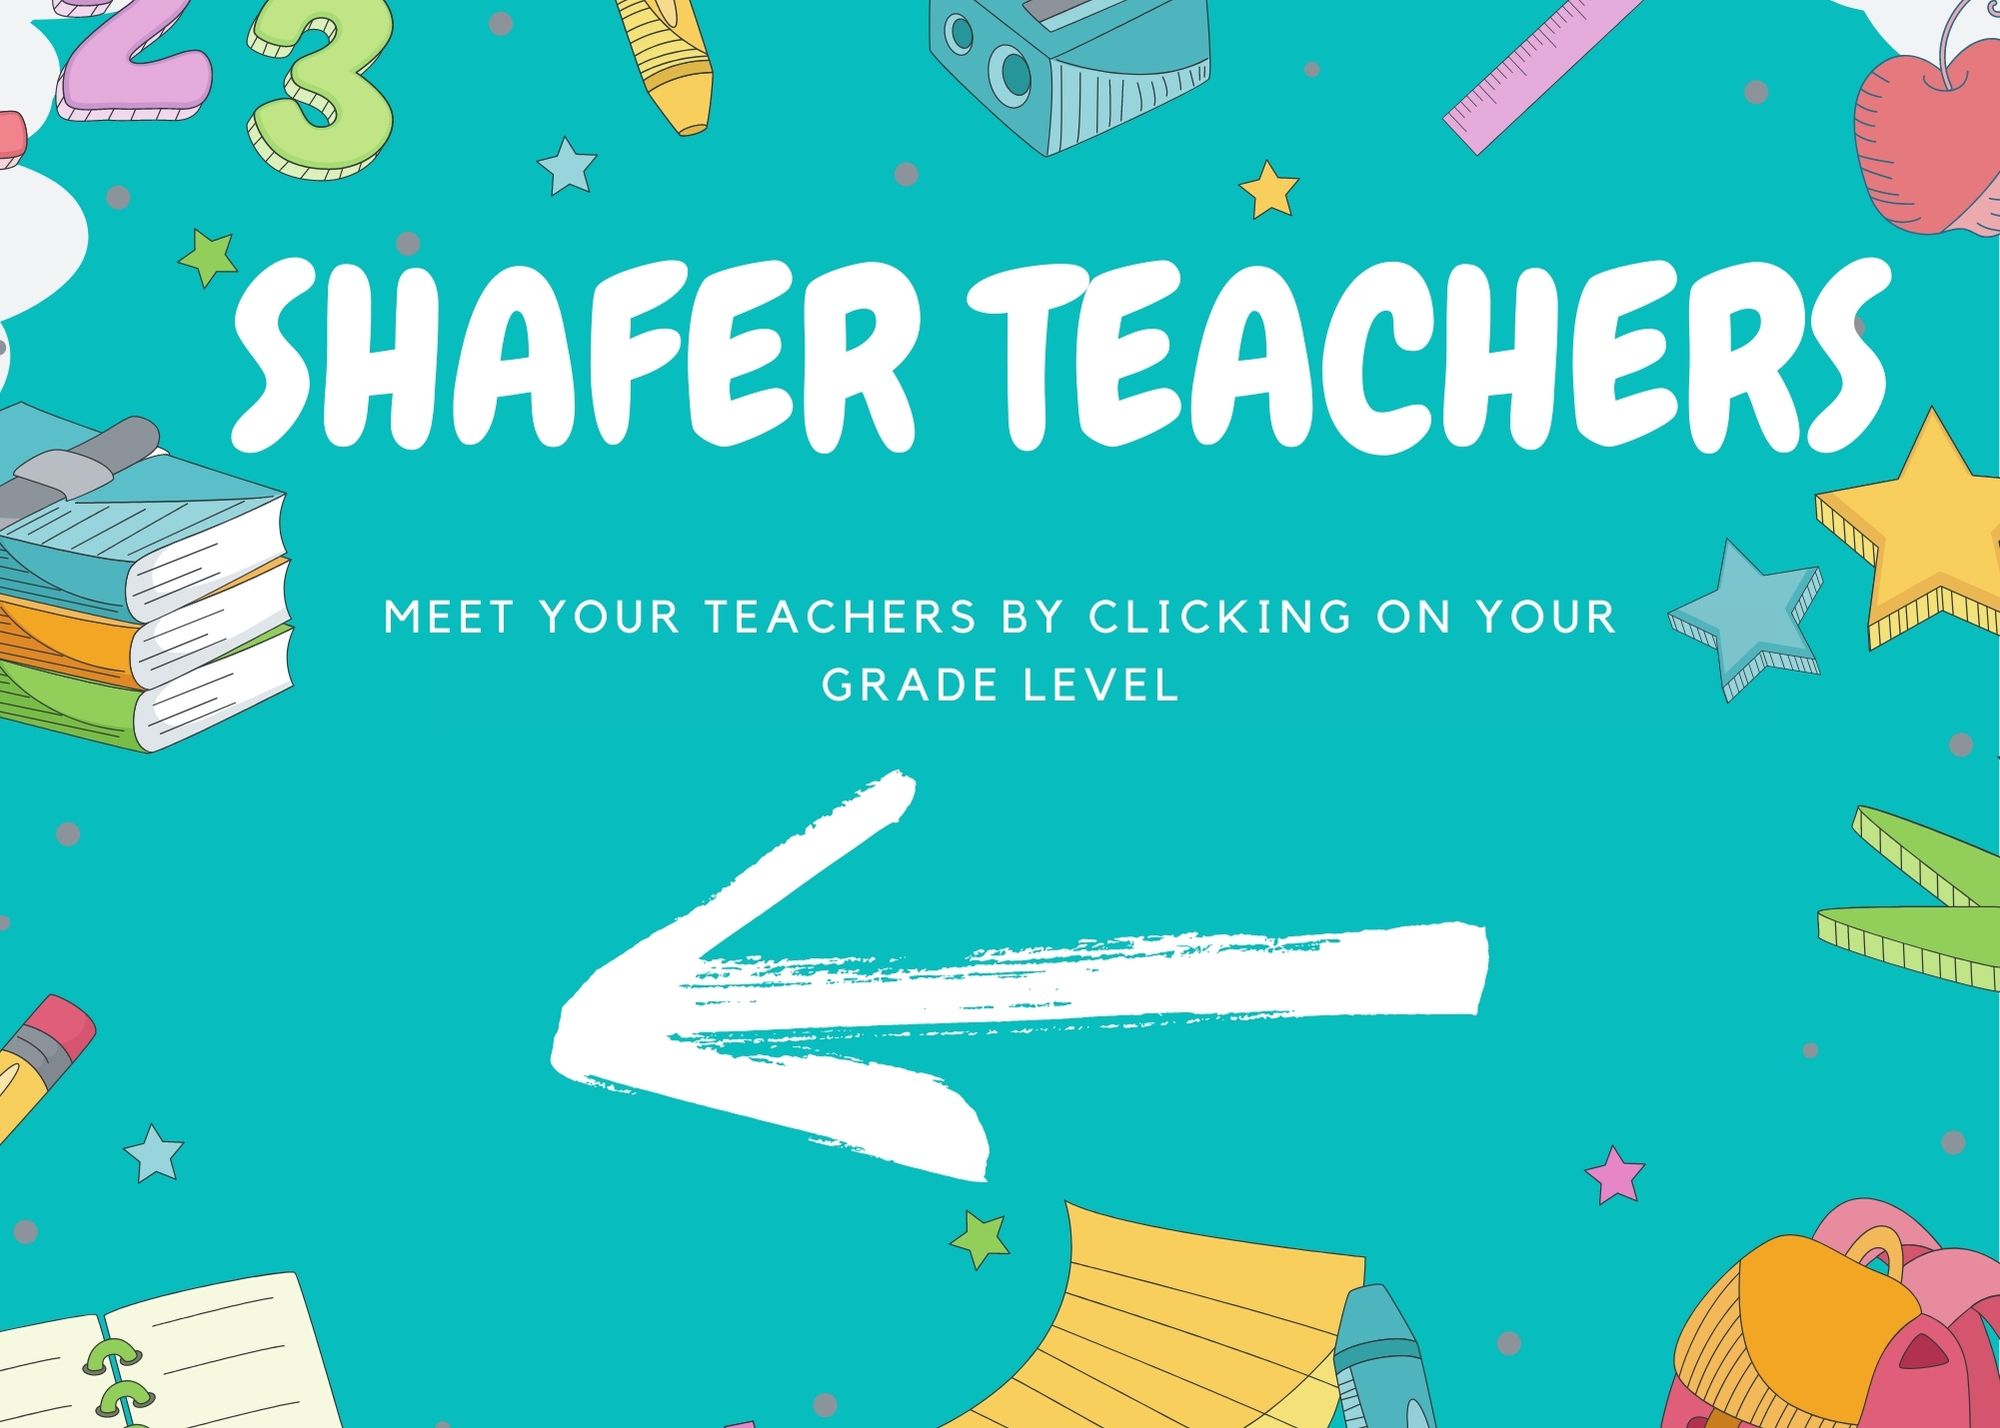 Meet your teachers by clicking on your grade level on the left side of the page